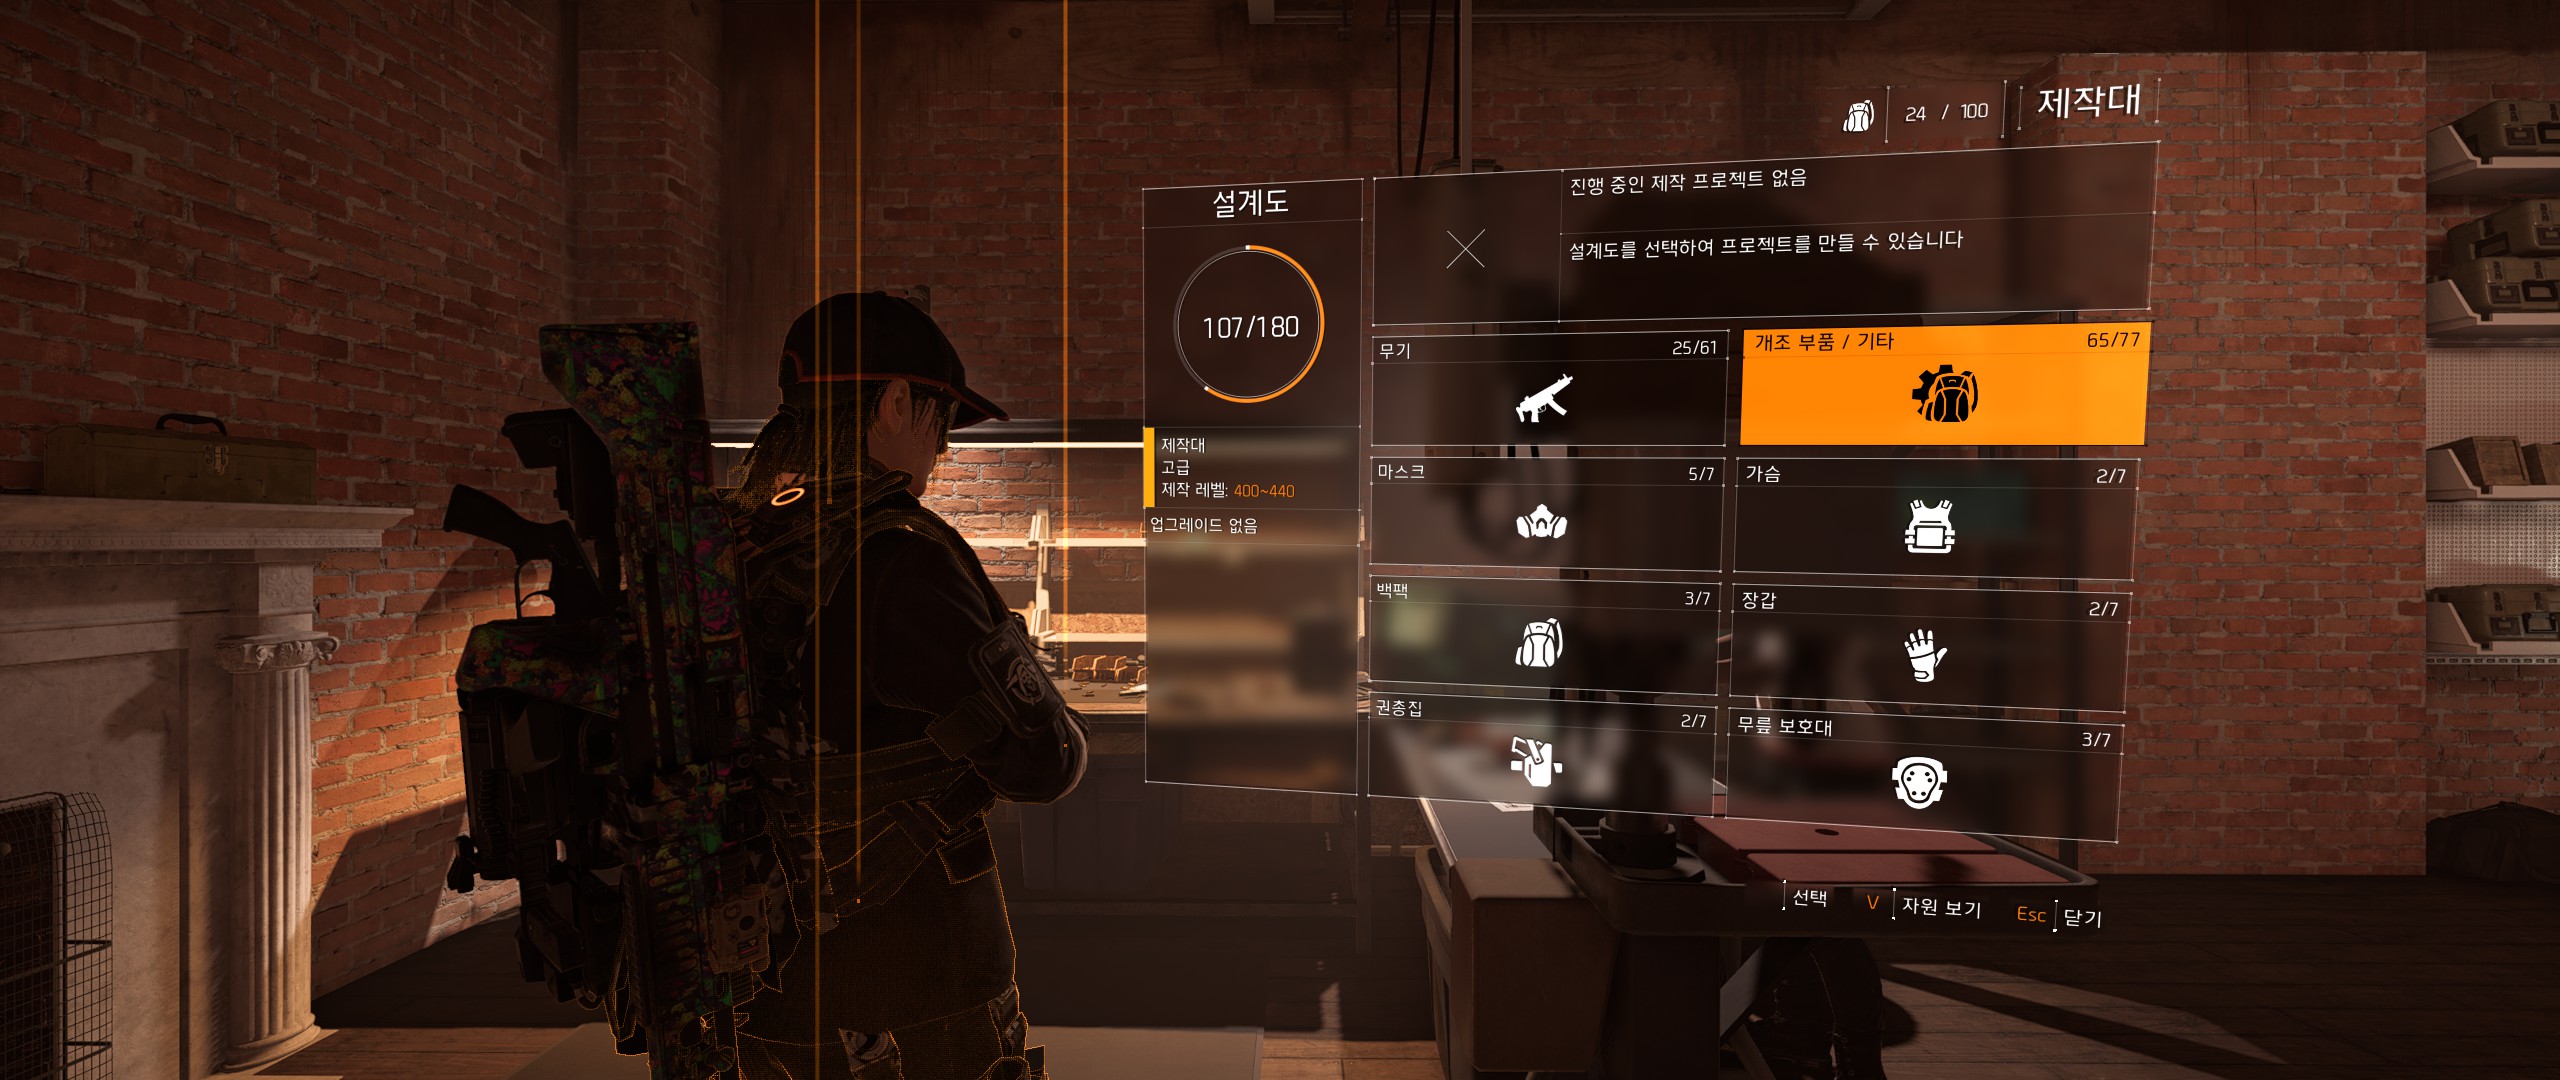 Tom Clancy's The Division® 22019-4-4-19-50-59.jpg